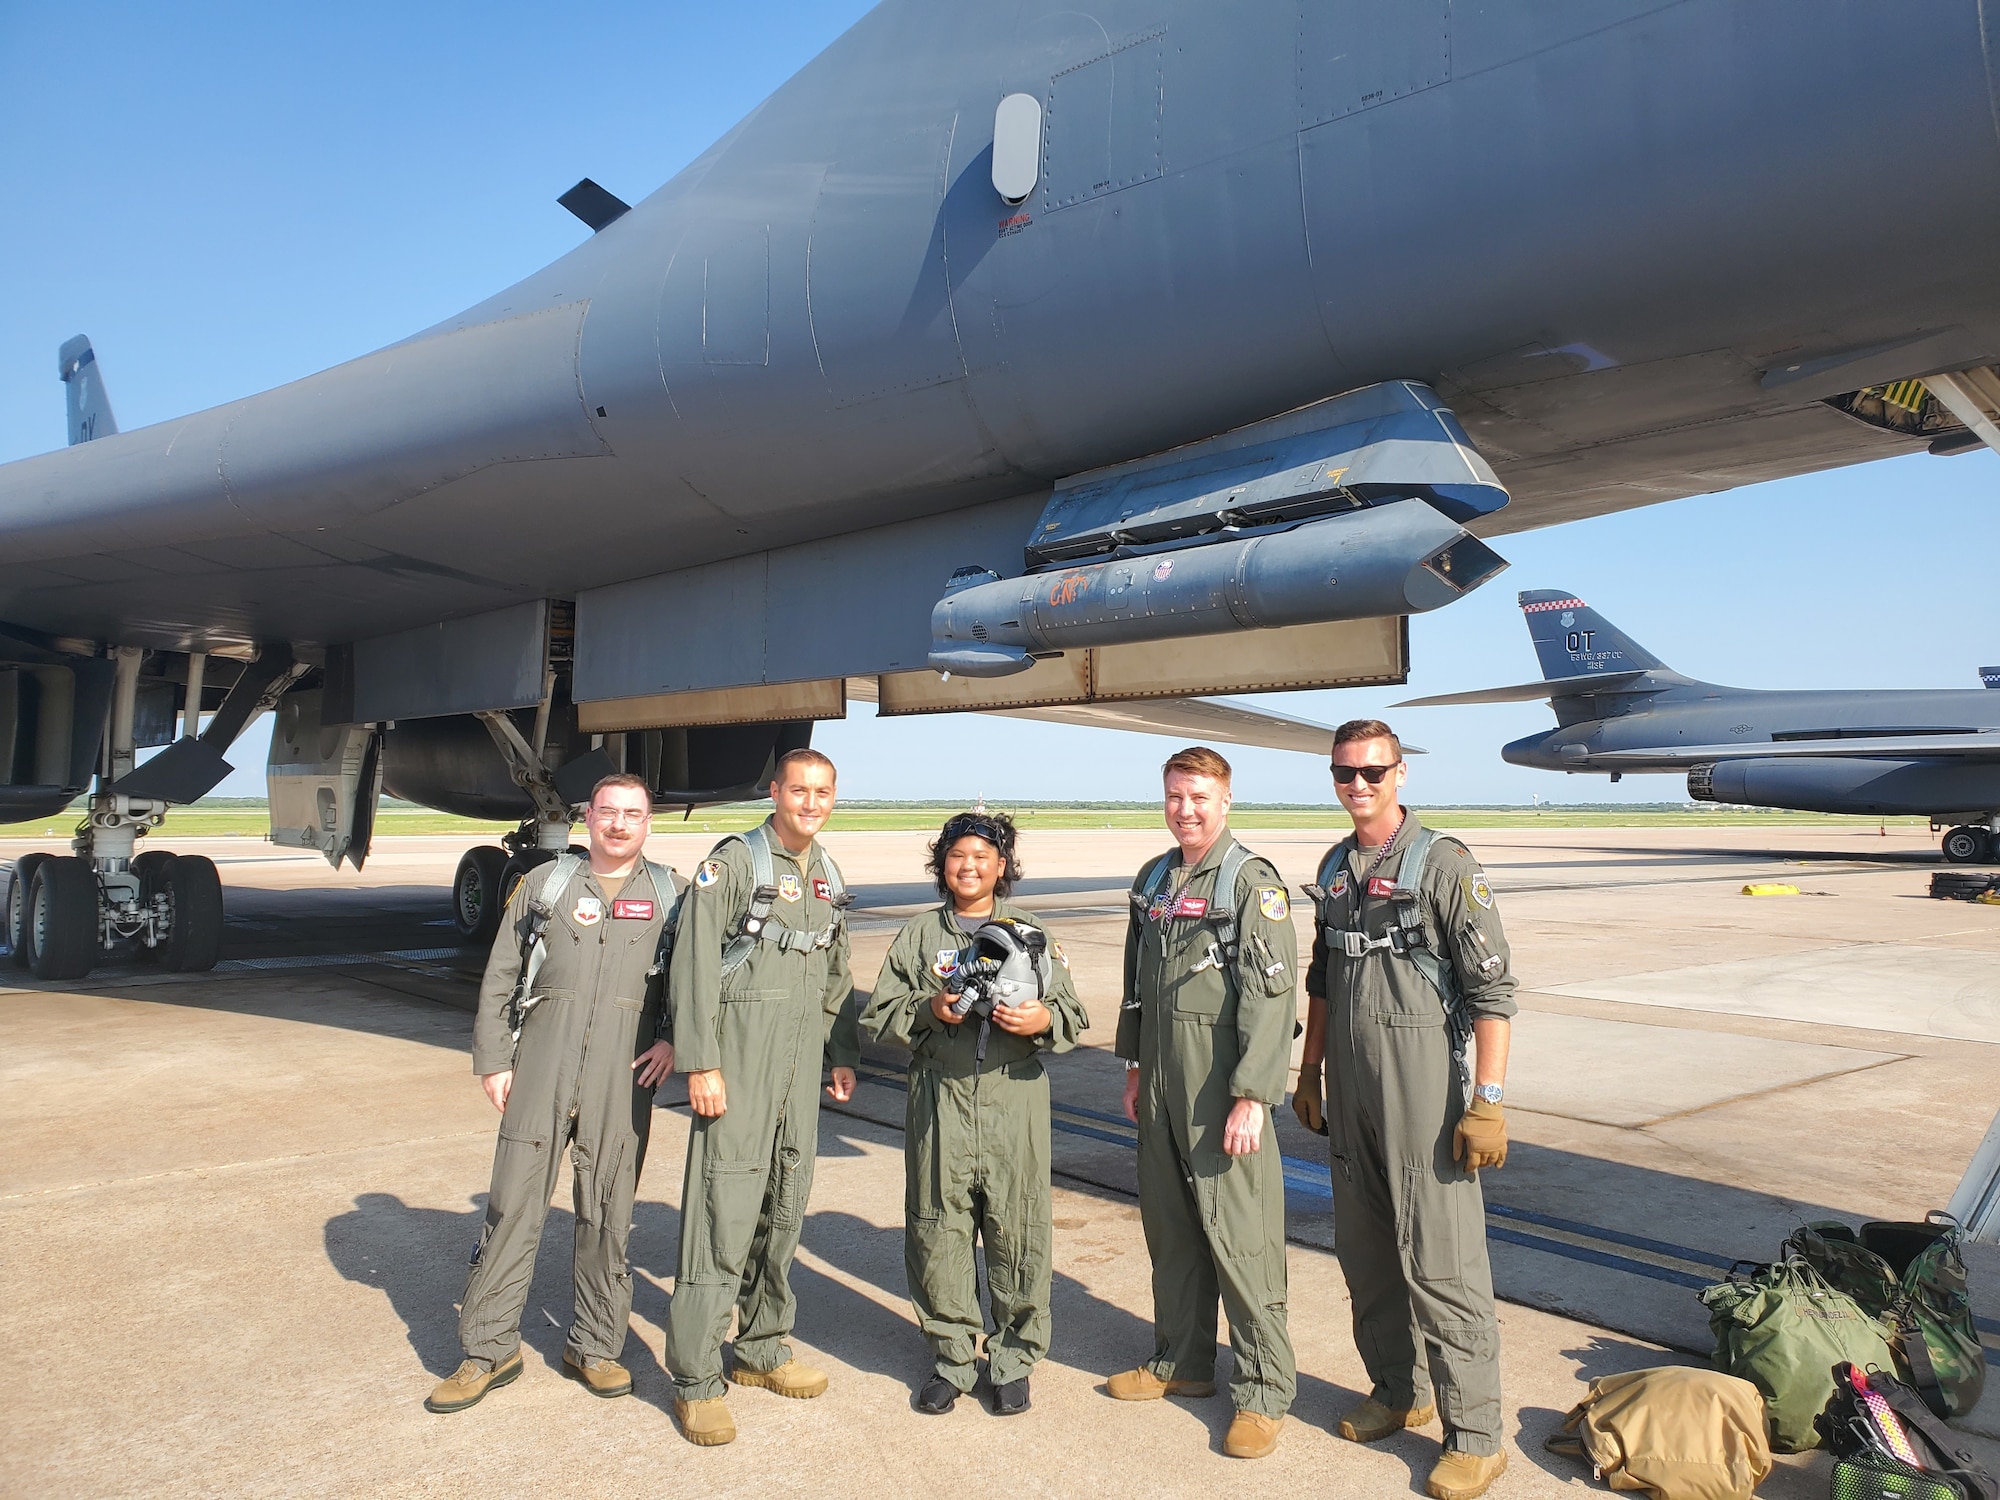 From left to right, Maj. Matthew Sutton, 337th Test and Evaluation Squadron director of test, Col. Jaime Hernandez, 53rd Test Management Group commander, Jayda SoileauGobert, Tech. Sgt. Justin SoileauGobert’s daughter, Lt. Col. Thomas Kinnear, 337th TES director of operations, and Maj. Mike Costello, 337th TES chief of weapons and tactics, pose for a group photo at Dyess Air Force Base, Texas, July 7, 2021.